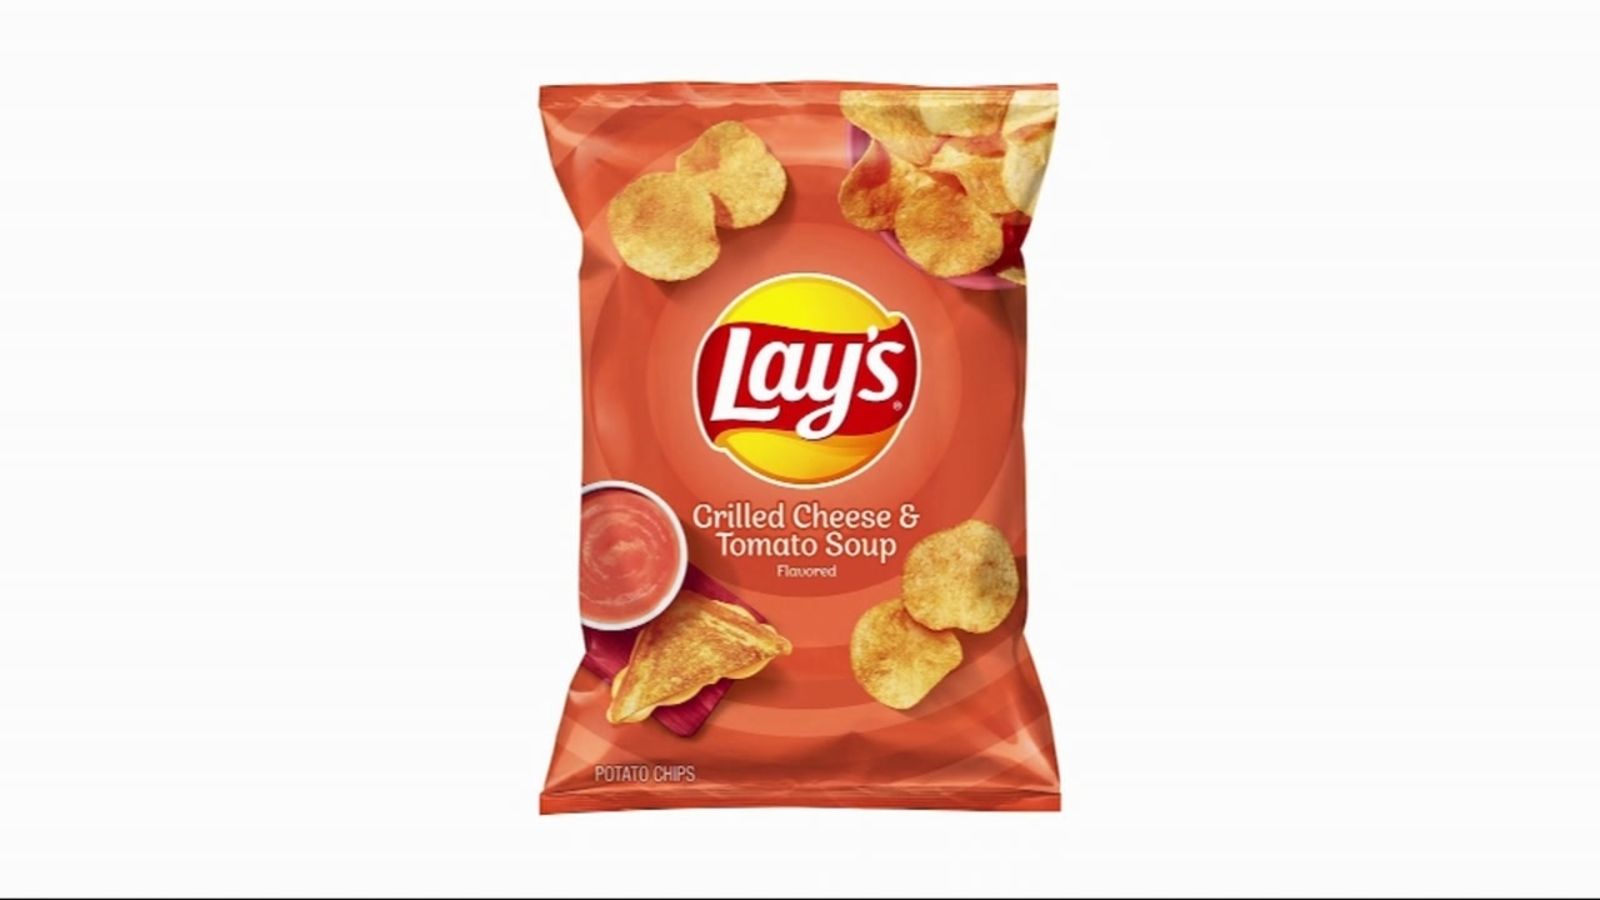 Lay's releasing new 'grilled cheese & tomato soup' chips